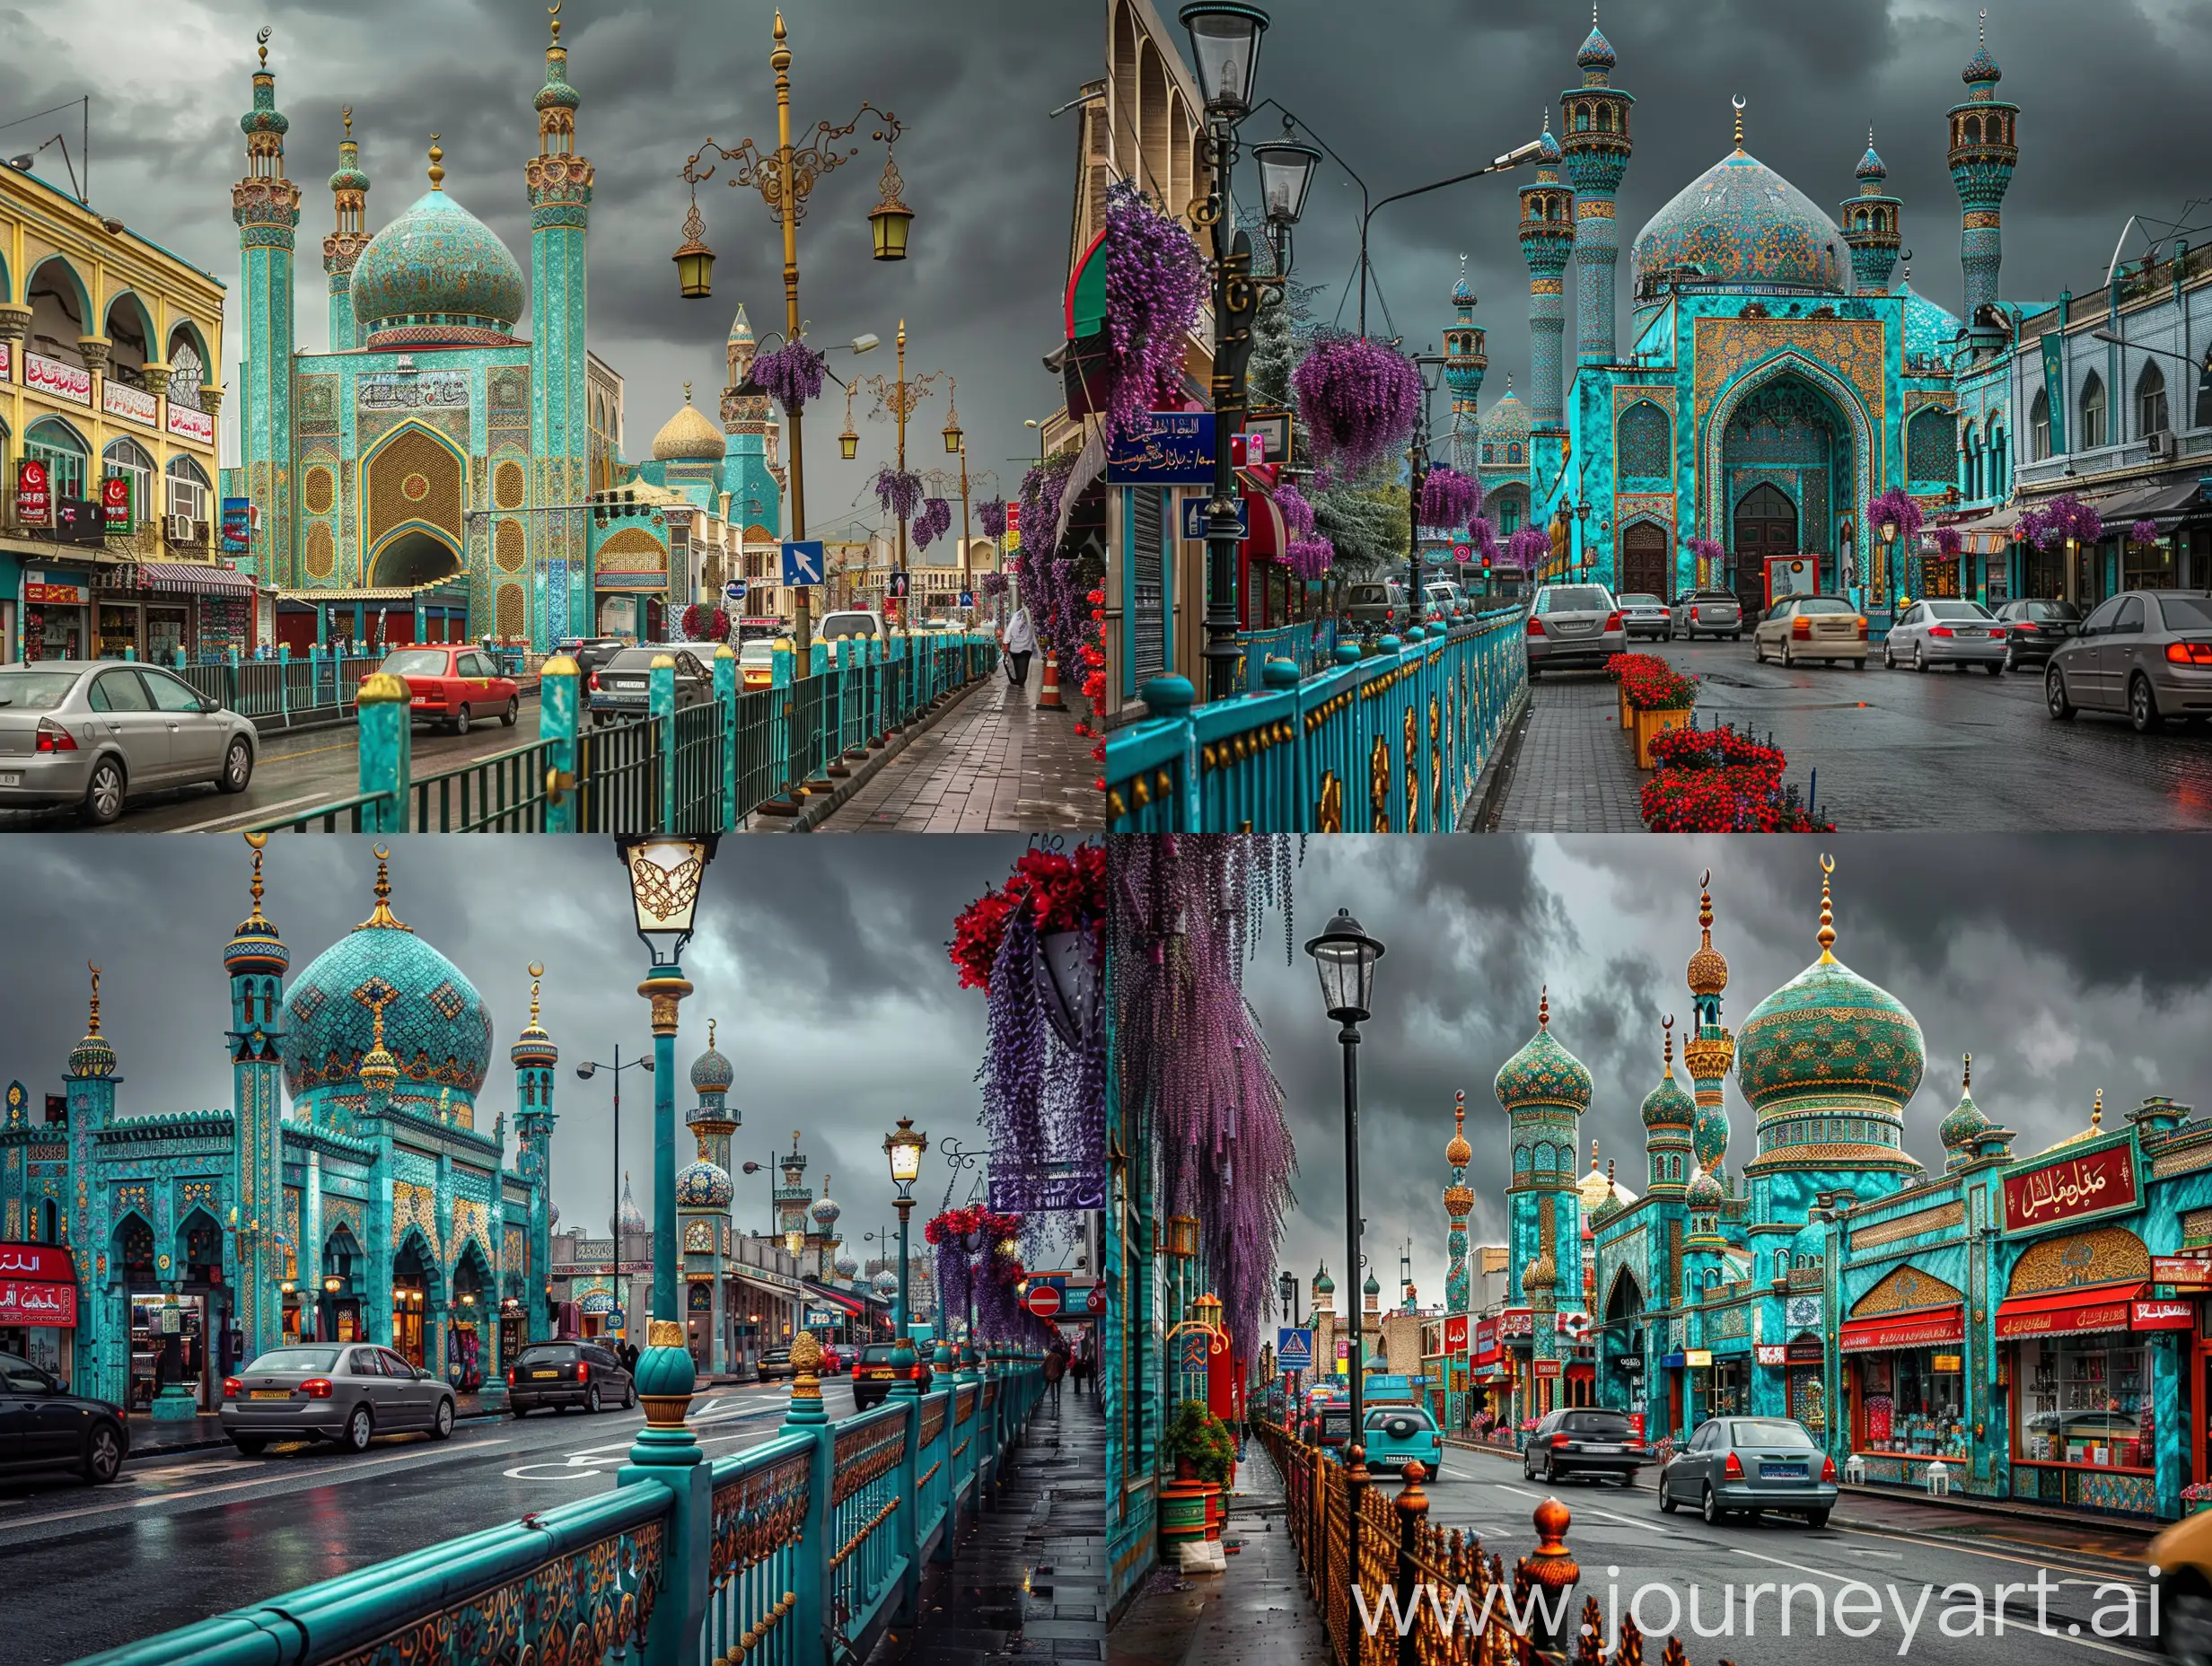 photograph, all buildings and mosques are Timurid turquoise marbled having golden red blue Persian tilework design, traffic on a France-like street having shops and stores, islamic style fence on sidewalk, few islamic ornamented lamp lights, direction signboards, lavender red hanging flowers, dark grey sky --ar 4:3 --style raw